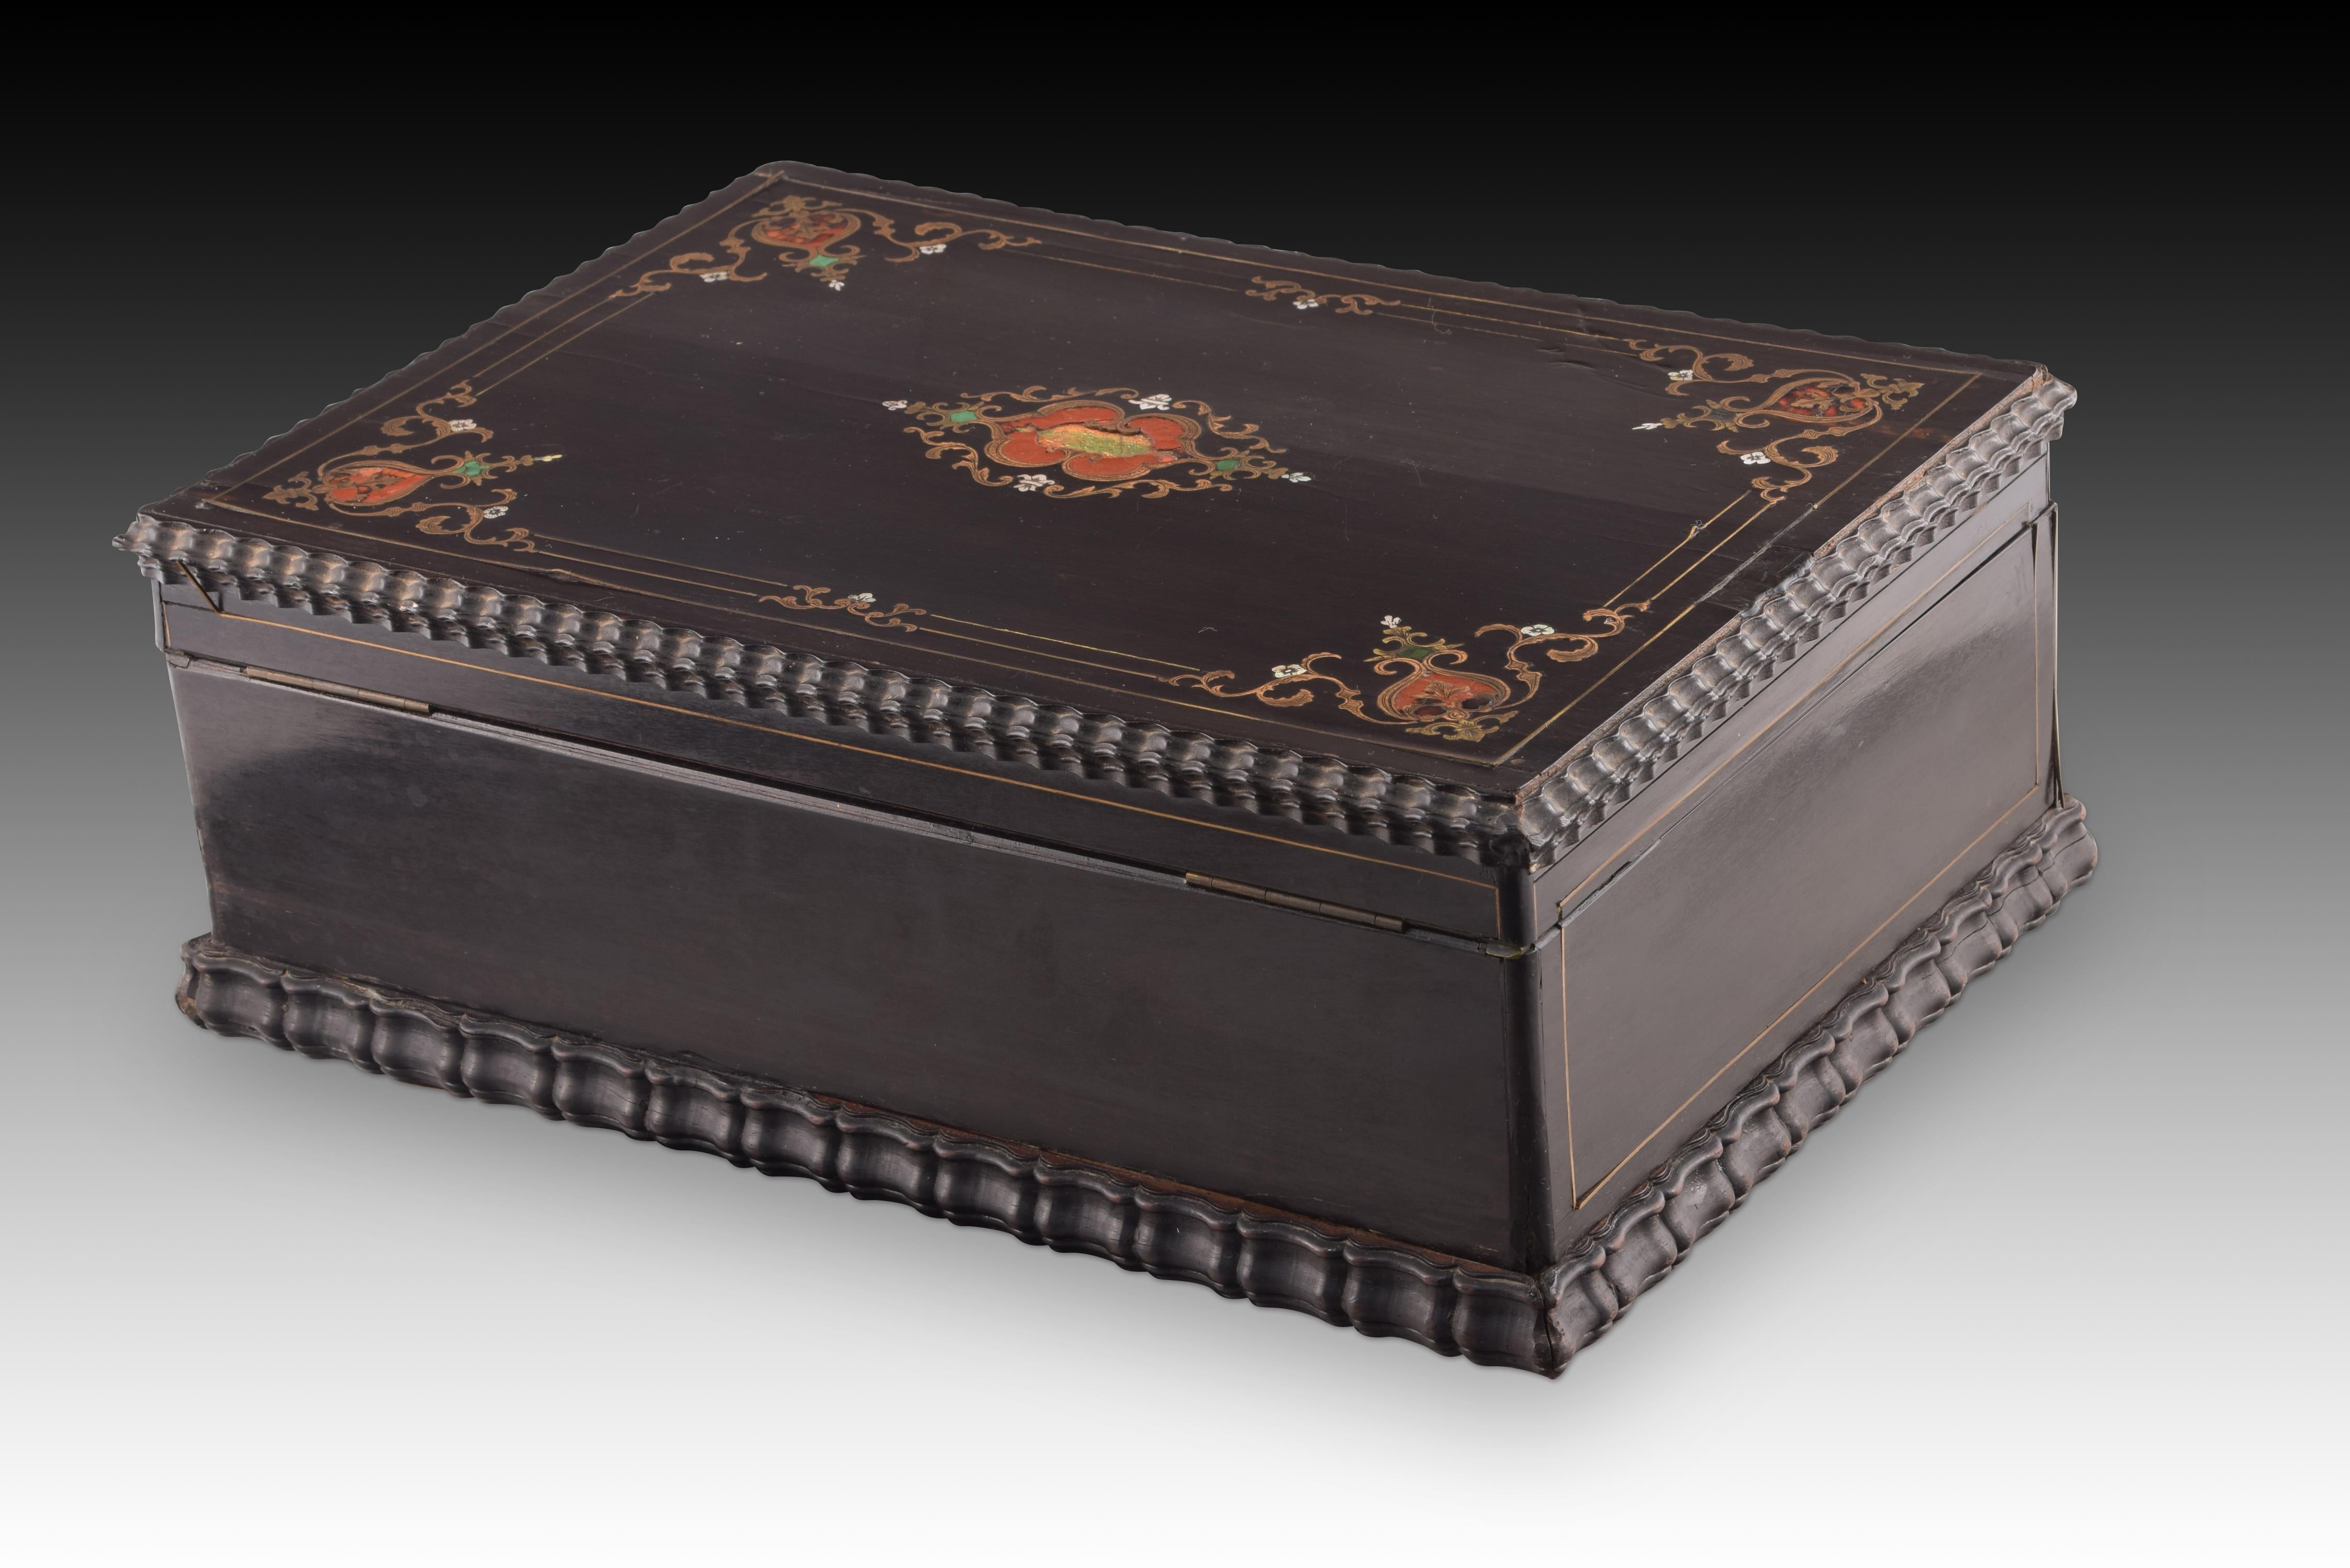 Neoclassical Revival Wooden box with metal inlay. Possibly french, 19th century. For Sale